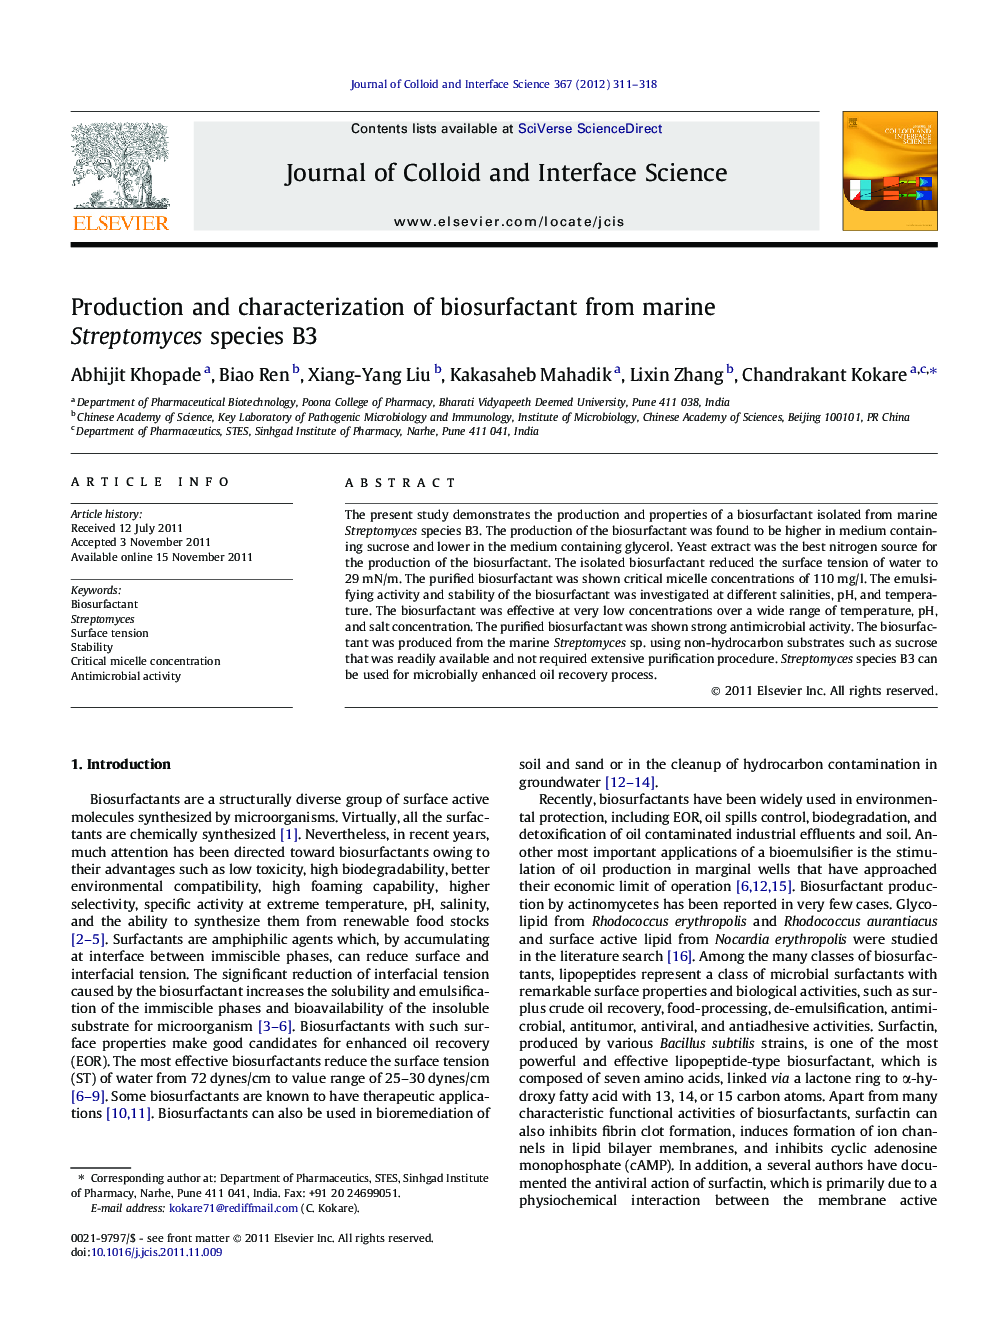 Production and characterization of biosurfactant from marine Streptomyces species B3